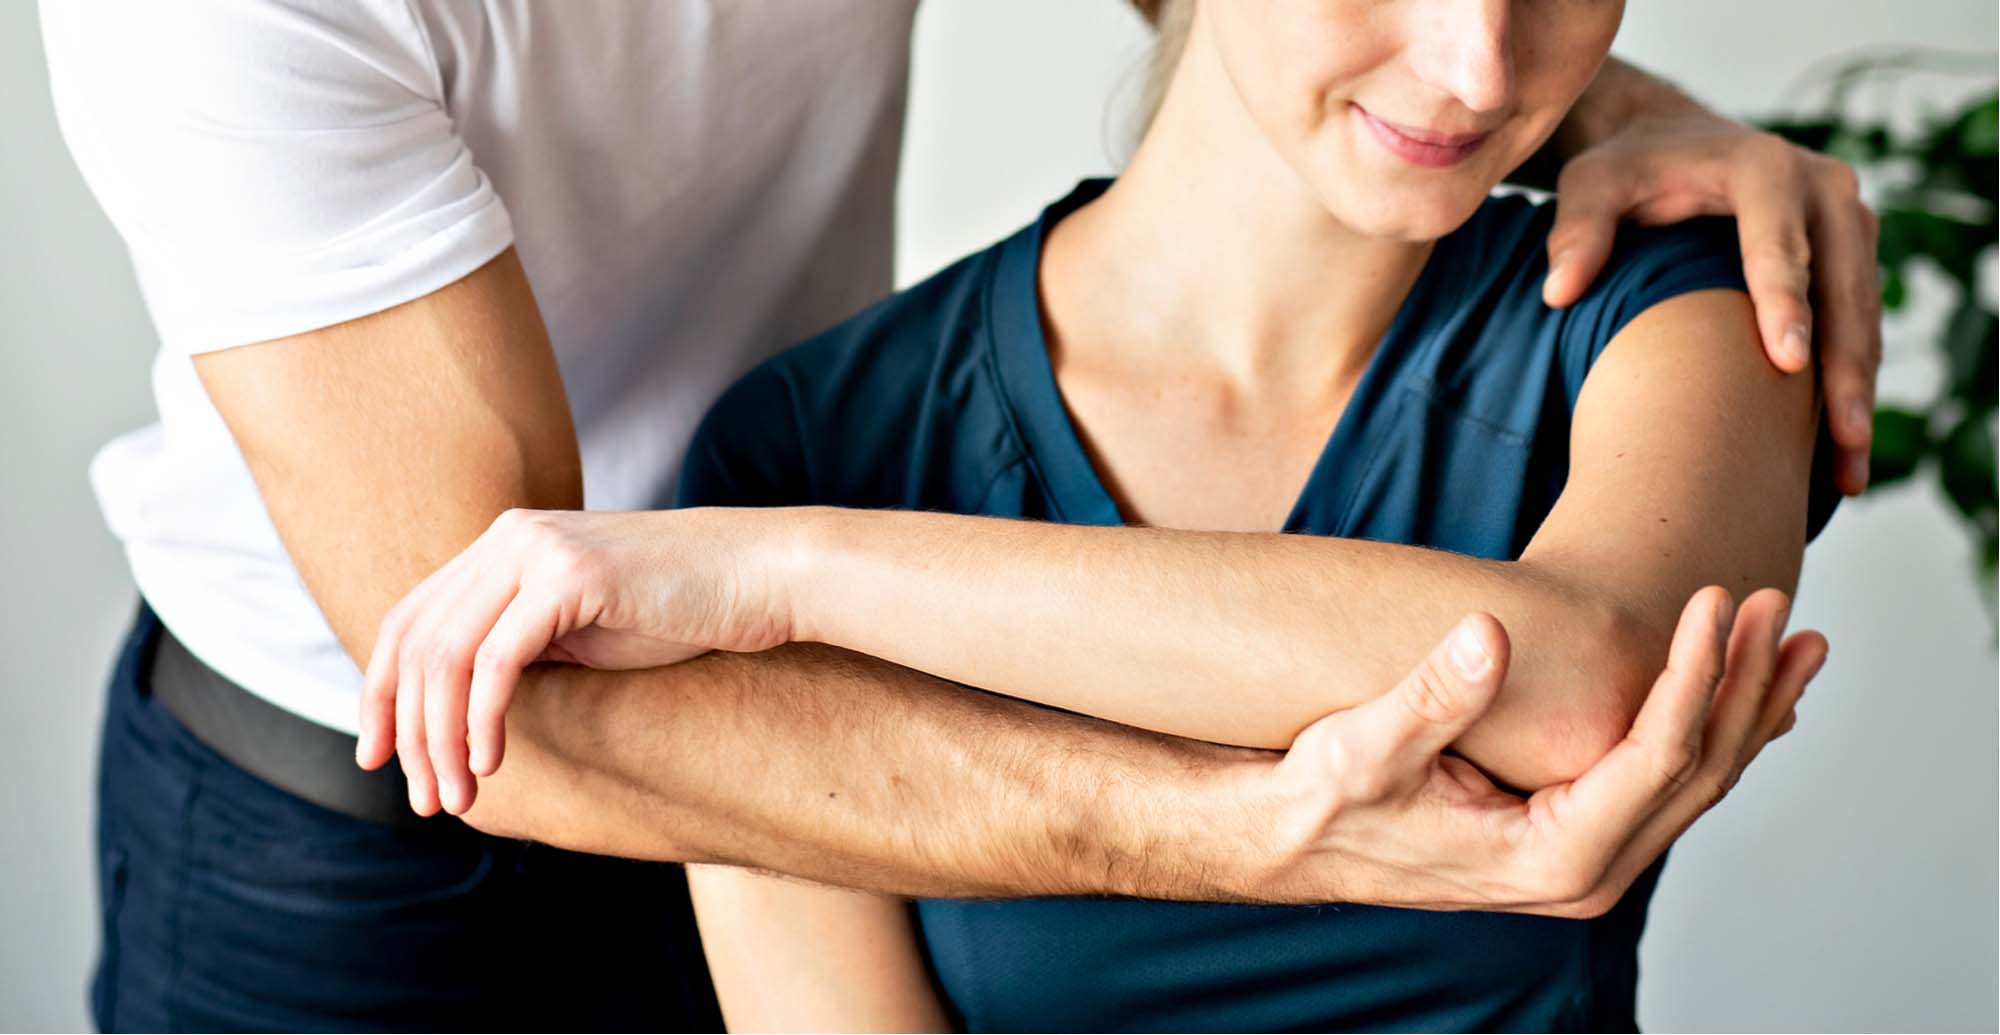 Did You Know October Is Physical Therapy Month?